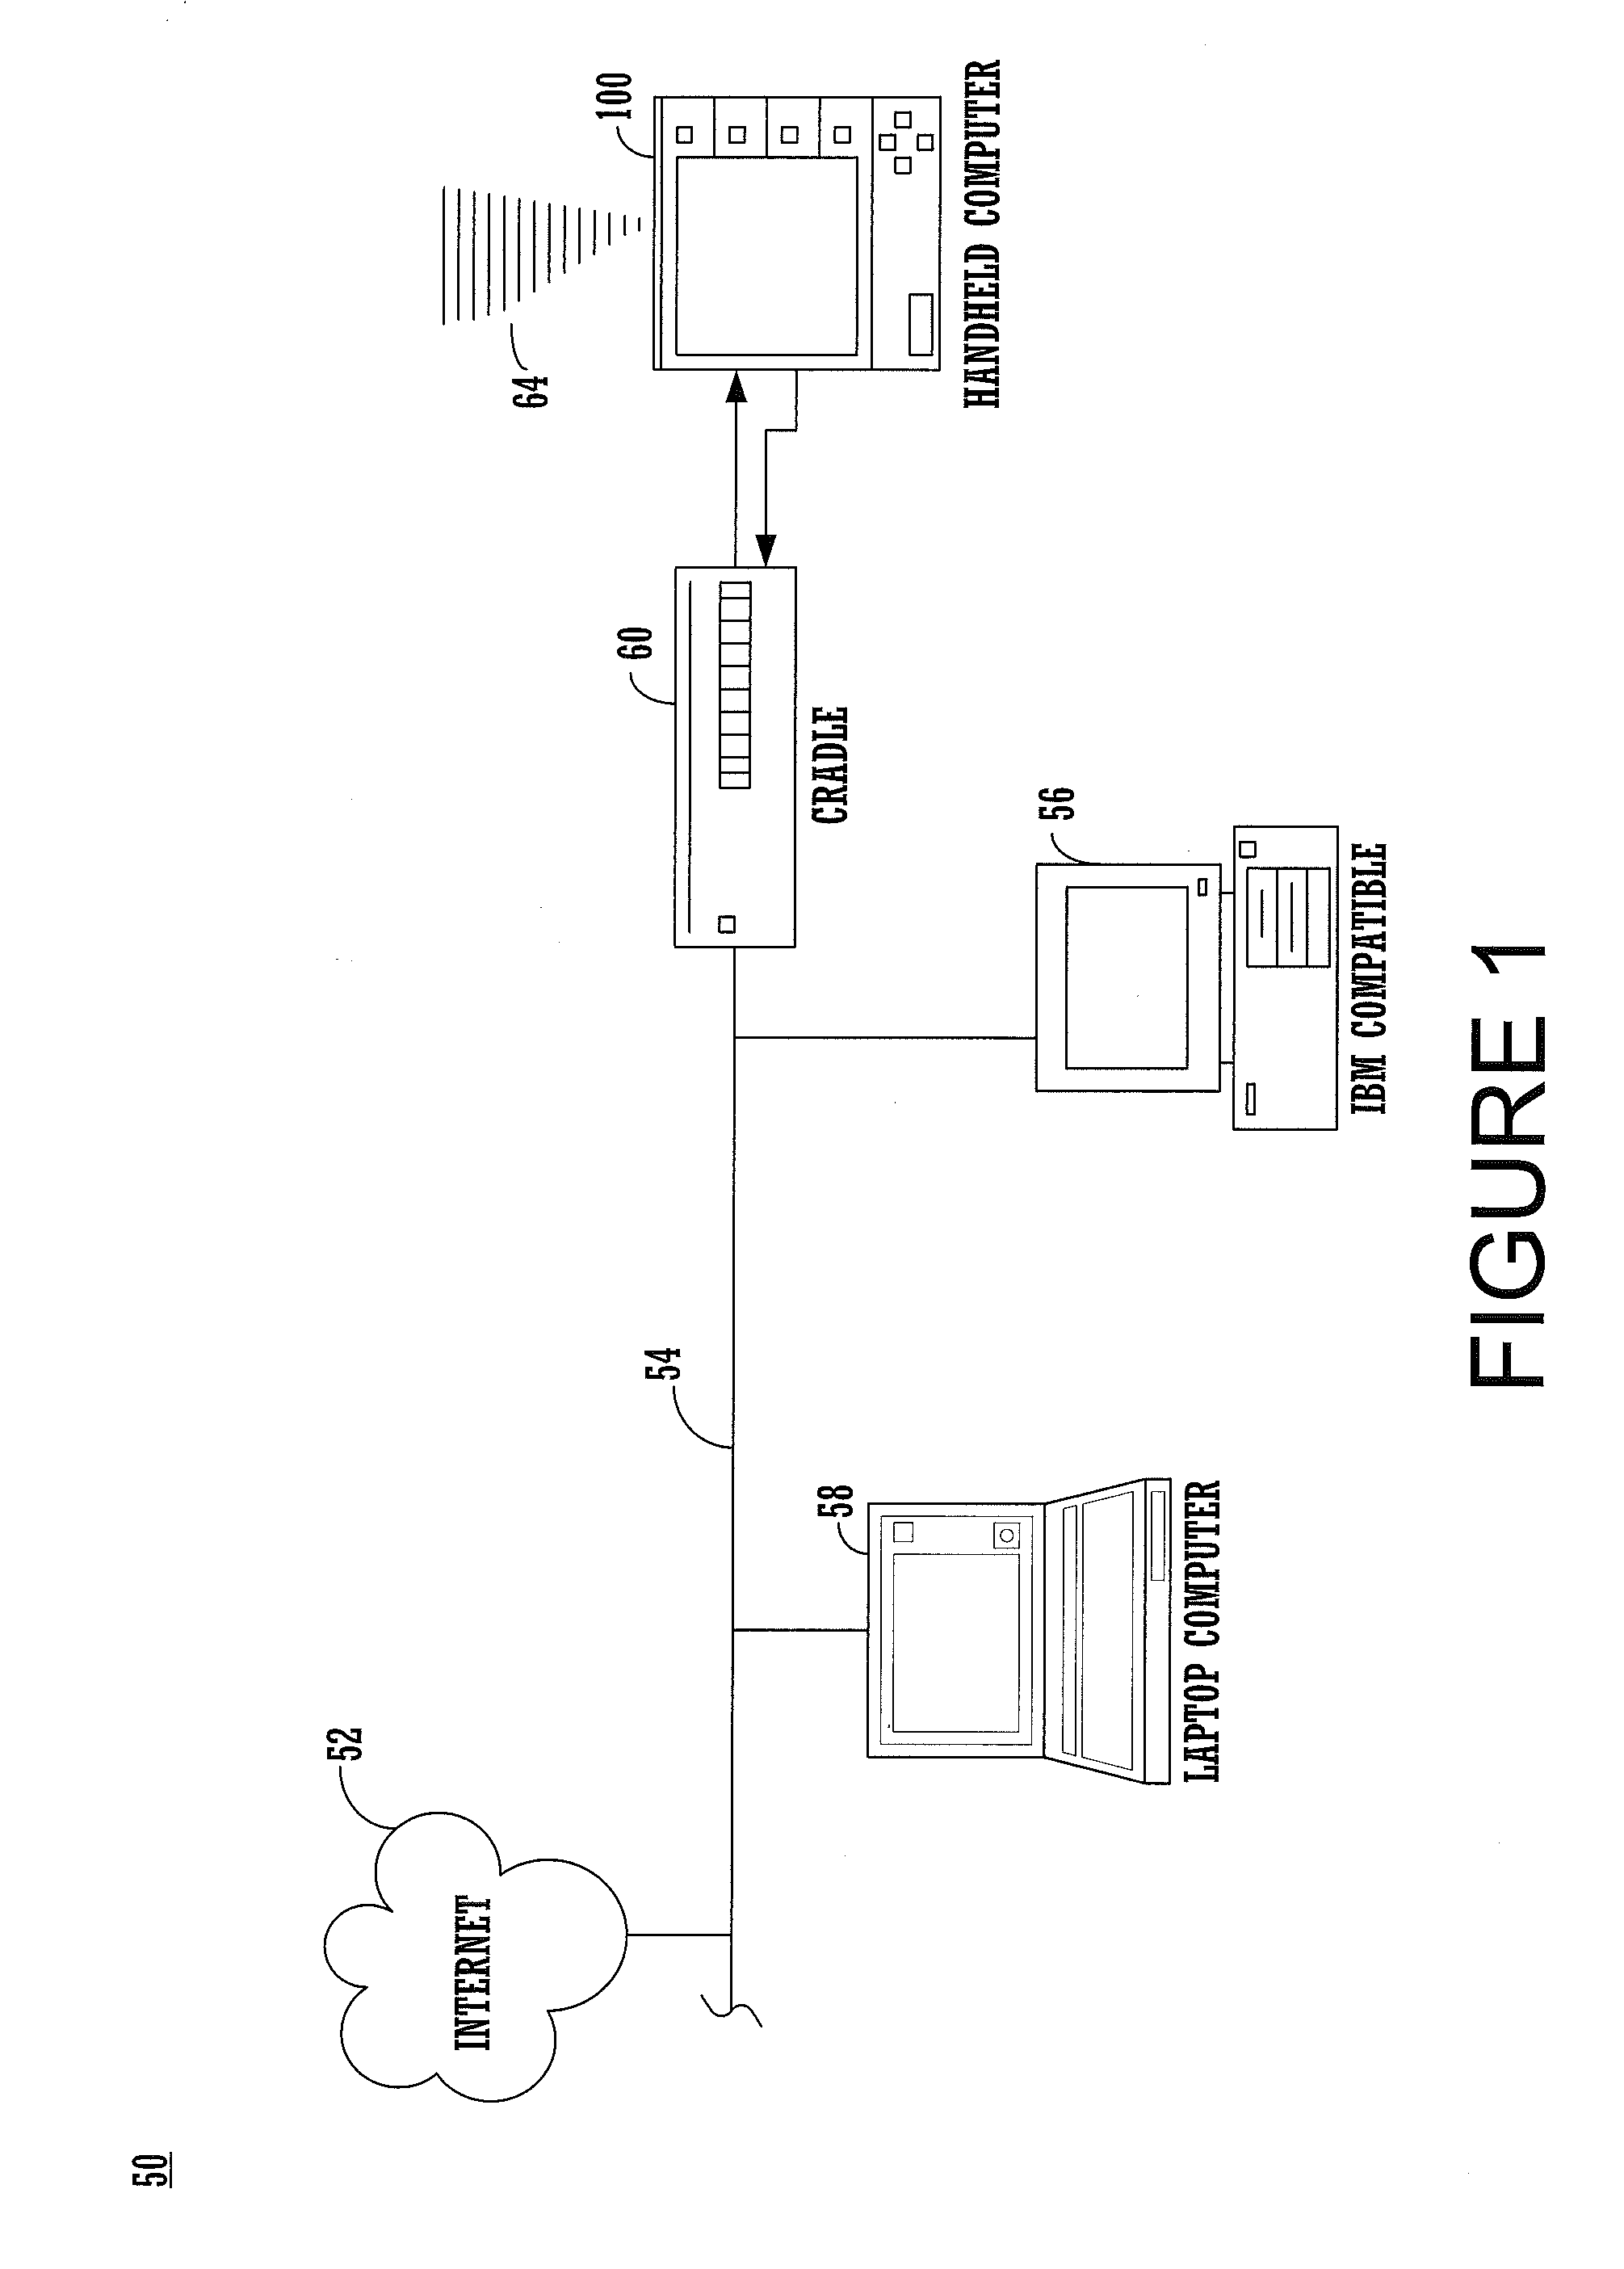 Method and apparatus for using pressure information for improved computer controlled handwriting recognition data entry and user authentication